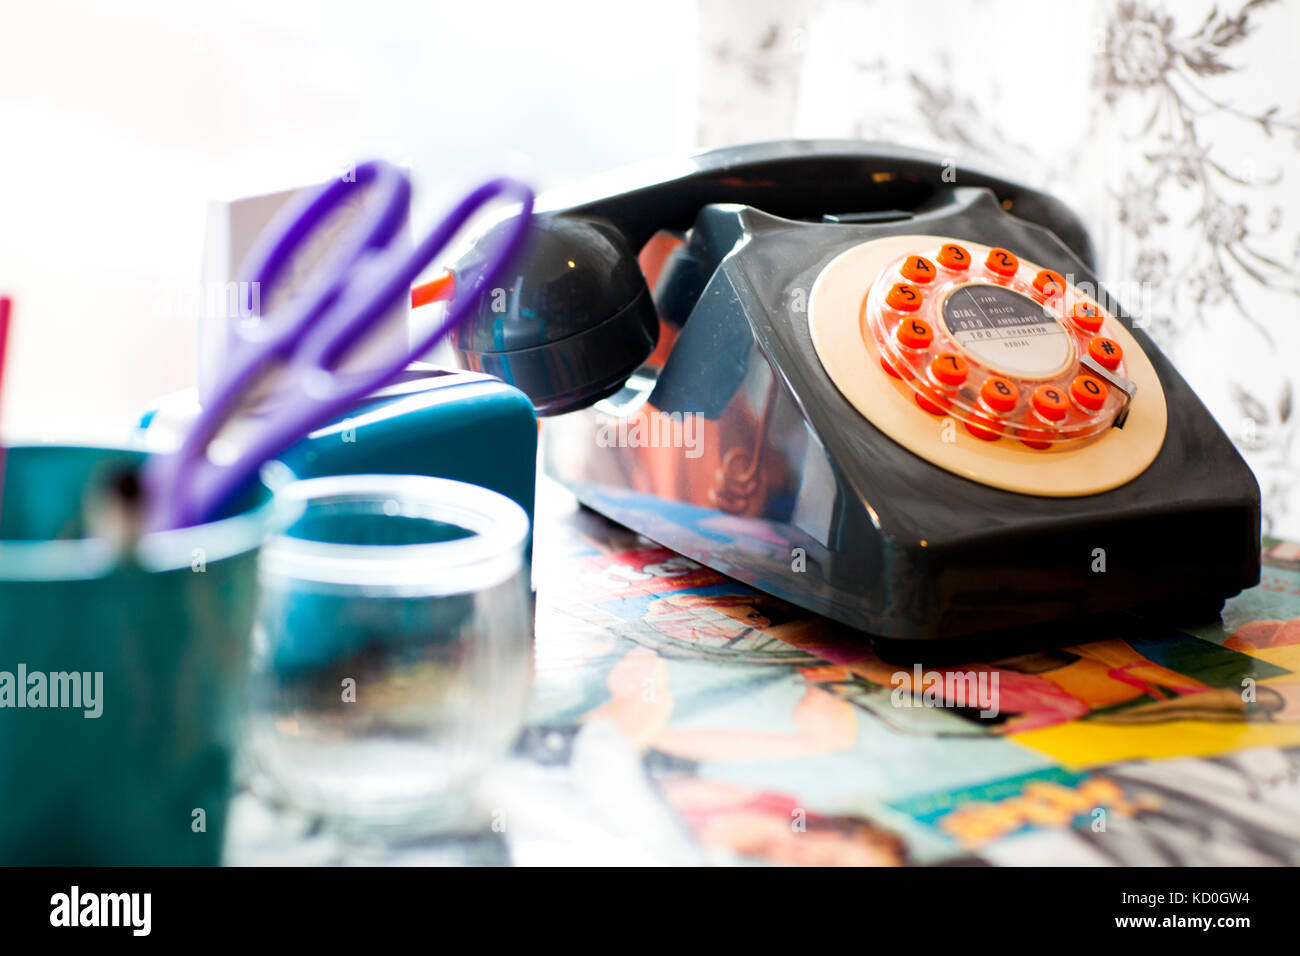 Old fashioned telephone on the reception desk of quirky hair salon Stock Photo